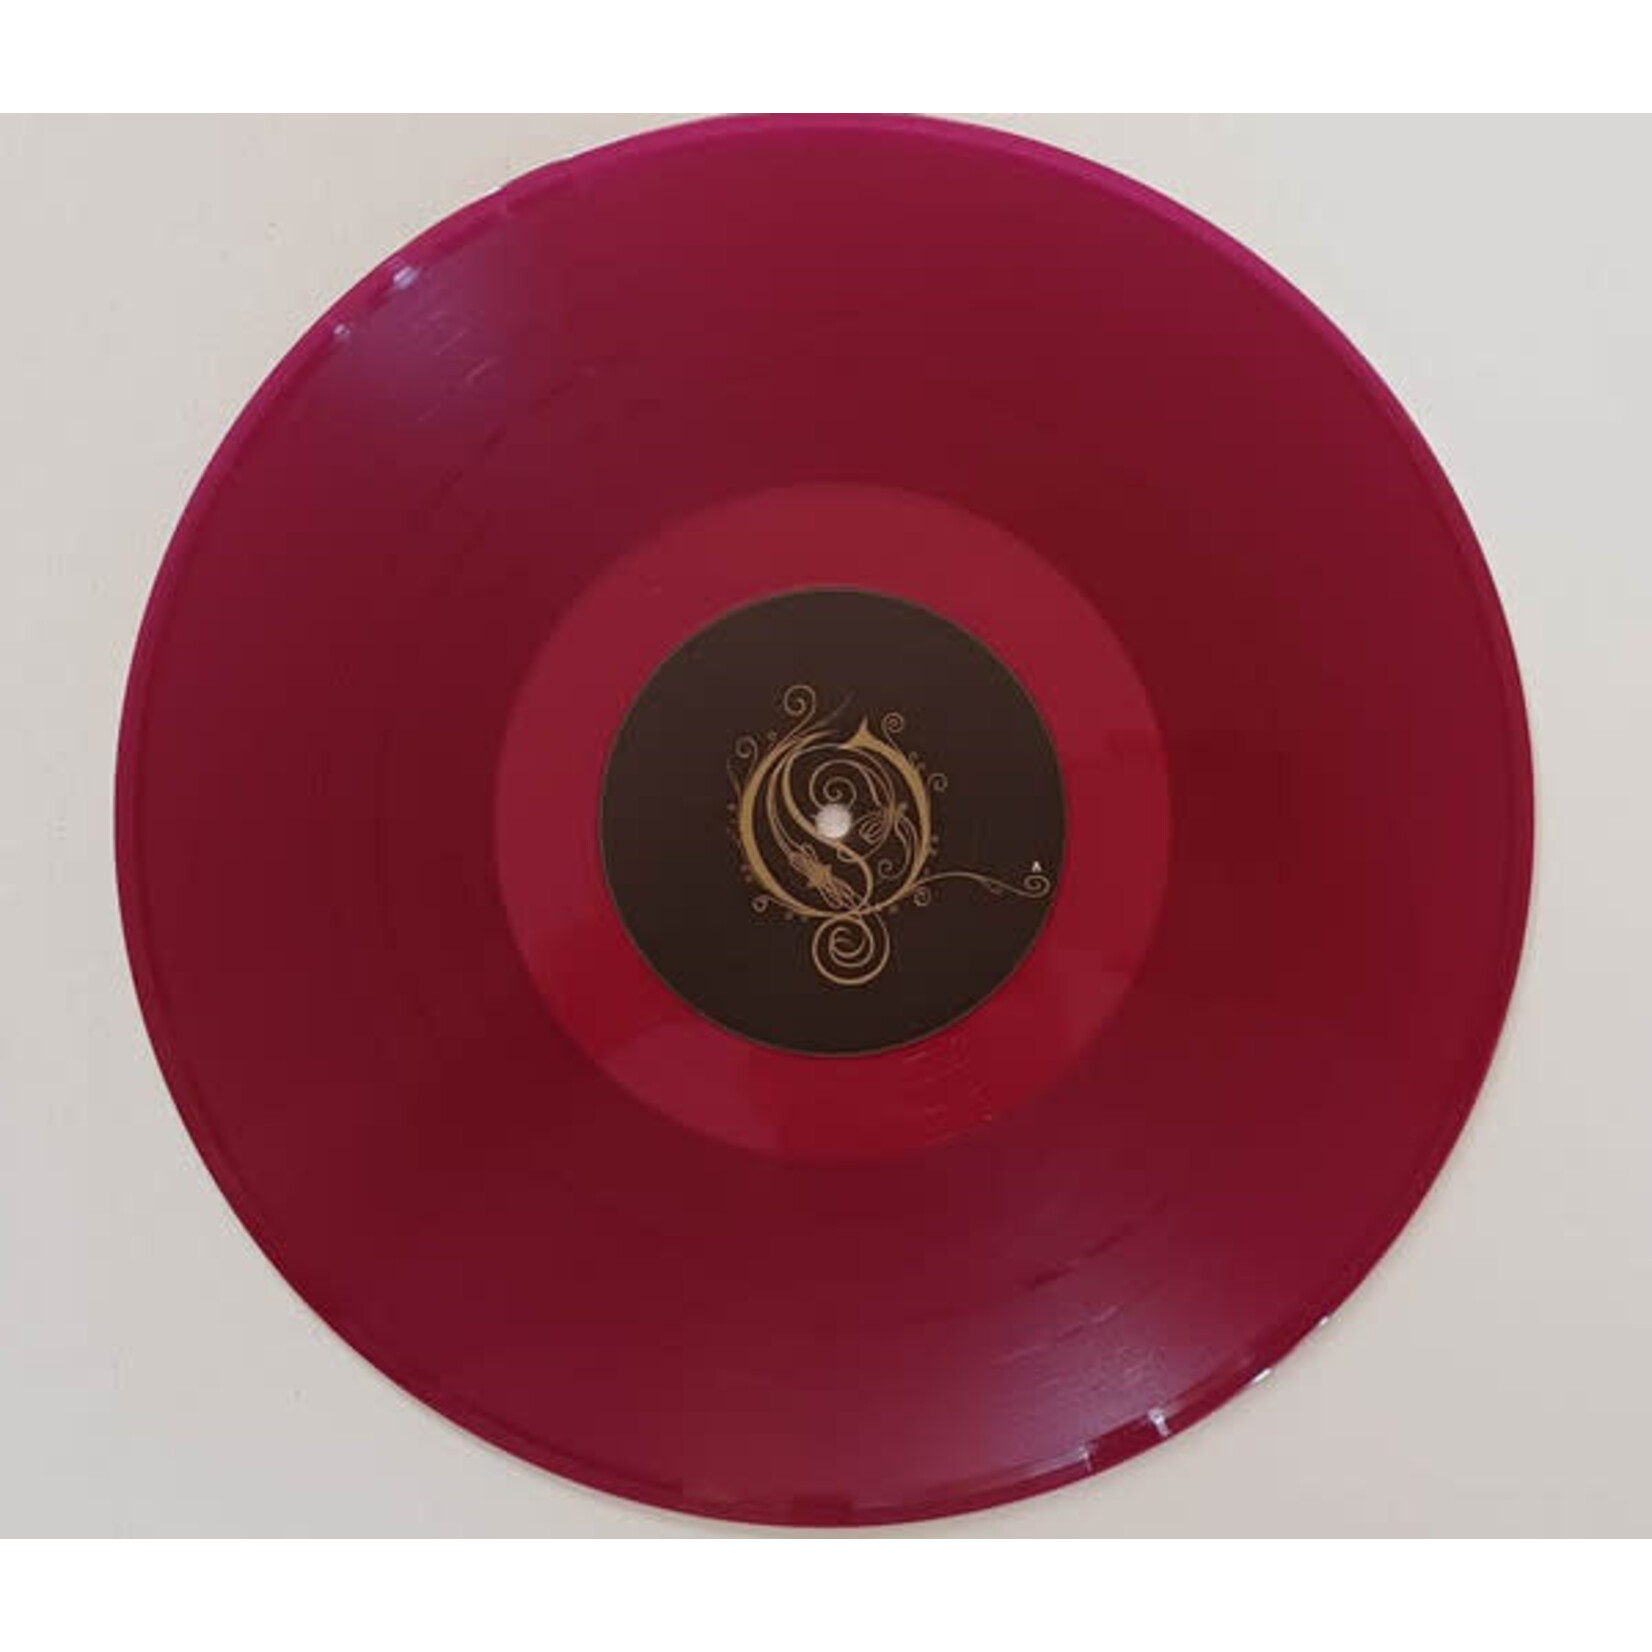 [New] Opeth - My Arms, Your Hearse (2LP, violet vinyl)